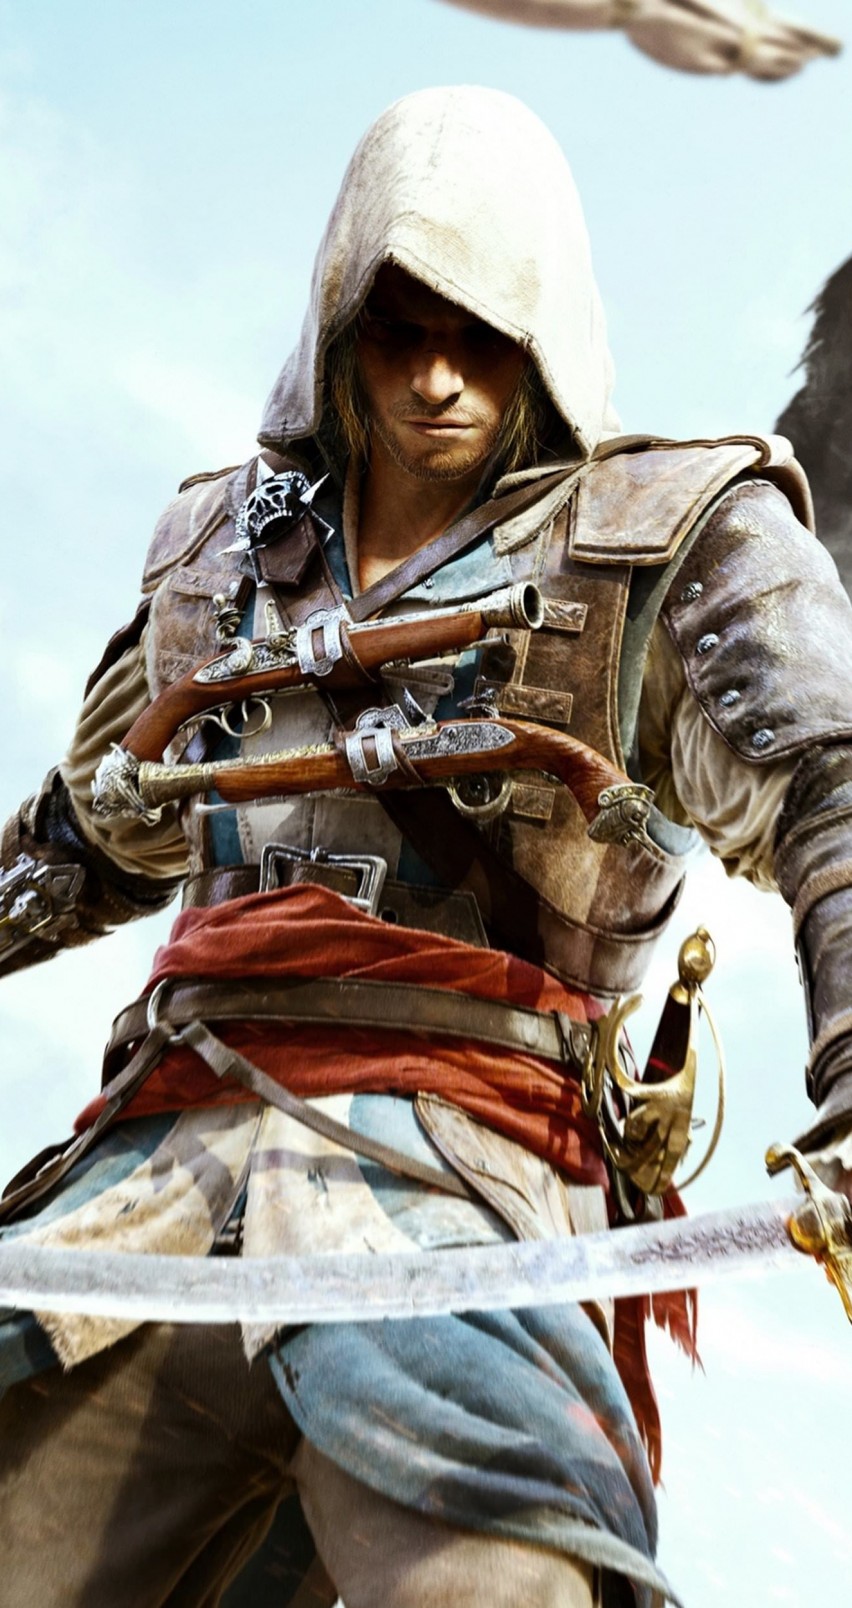 Assassin's Creed IV: Black Flag Wallpaper for Apple iPhone 6 / 6s